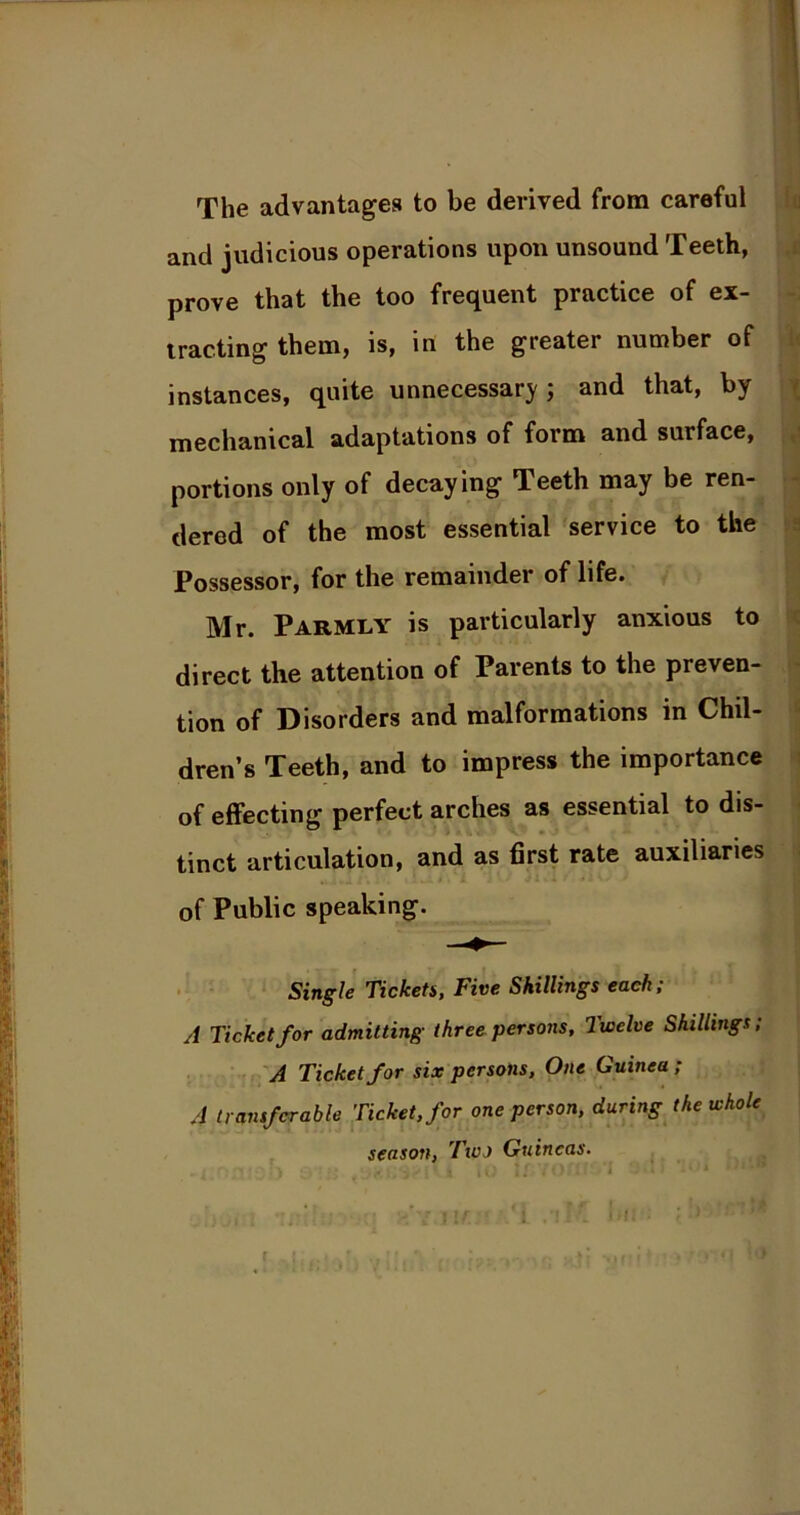 The advantages to be derived from careful and judicious operations upon unsound Teeth, prove that the too frequent practice of ex- tracting them, is, in the greater number of instances, quite unnecessary ; and that, by mechanical adaptations of form and surface, portions only of decaying Teeth may be ren- dered of the most essential service to the Possessor, for the remainder of life. Mr. Parmly is particularly anxious to direct the attention of Parents to the preven- tion of Disorders and malformations in Chil- dren’s Teeth, and to impress the importance of effecting perfect arches as essential to dis- tinct articulation, and as first rate auxiliaries of Public speaking. Single Tickets, Five Skillings each; A Ticket for admitting three persons. Twelve Shillings; A Ticket for six persons. One Guinea ; A transferable Ticket, for one person, during the whole season, Two Guineas.